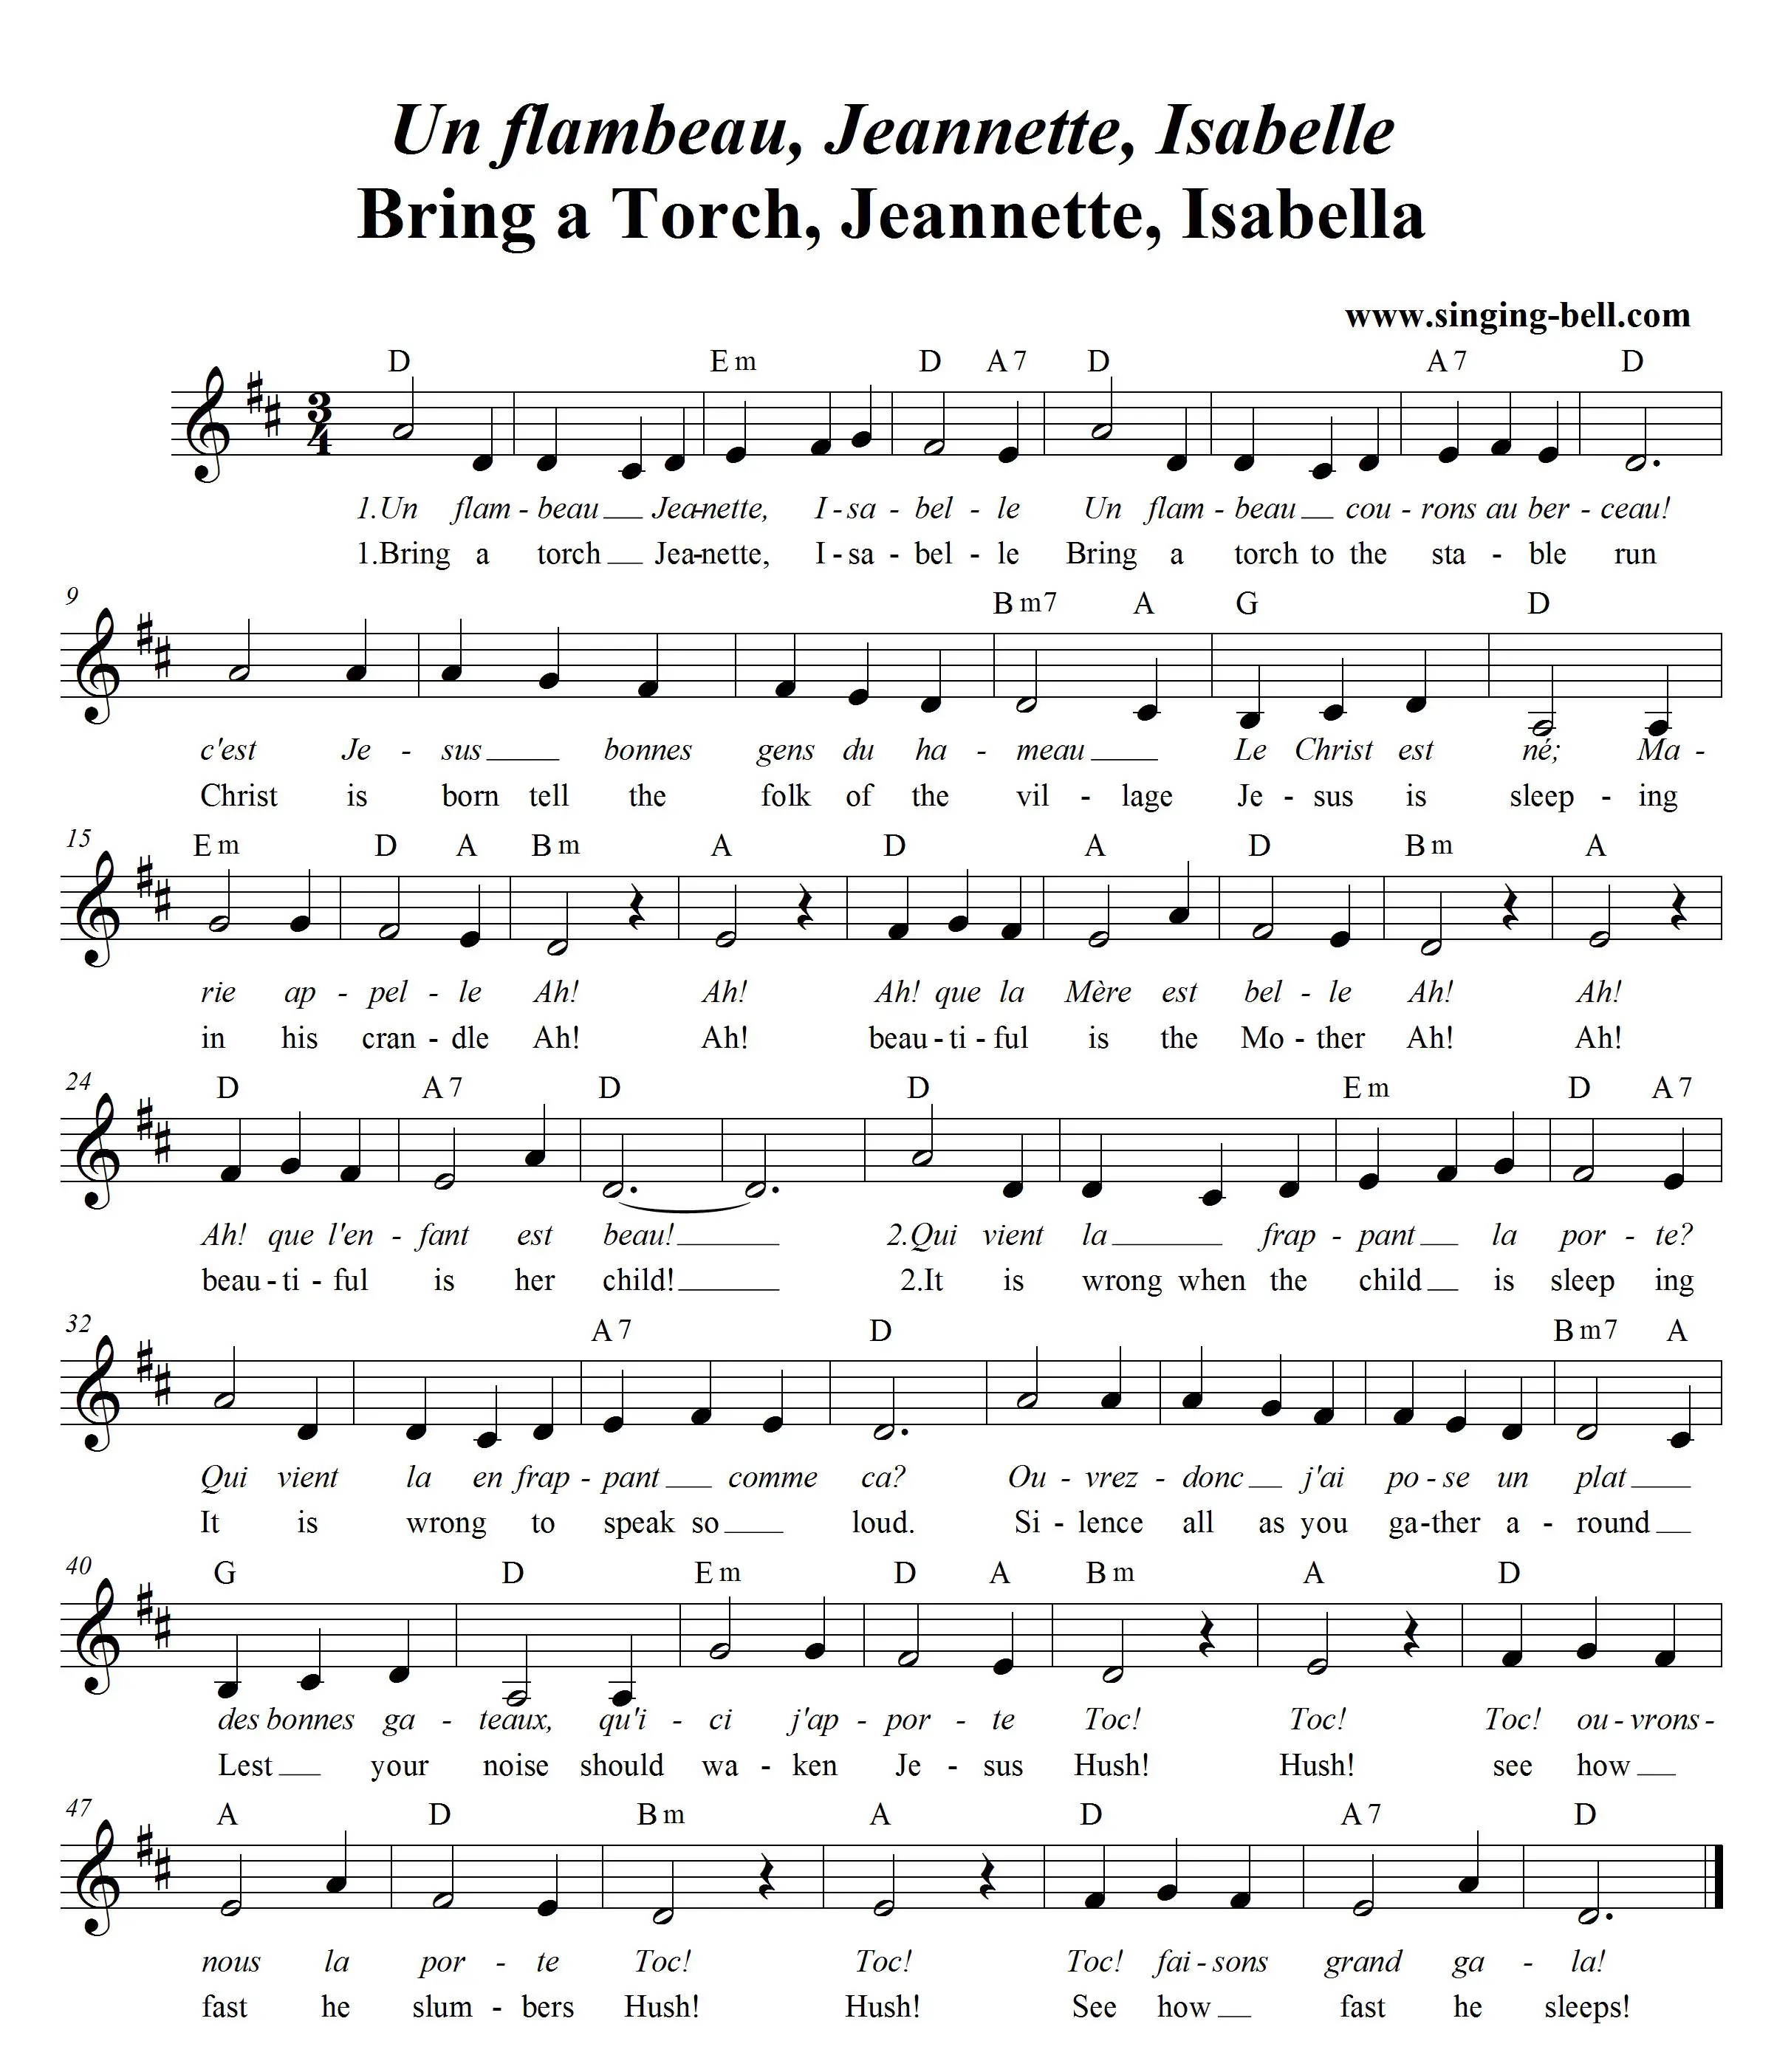 Bring a Torch, Jeanette, Isabelle free music download